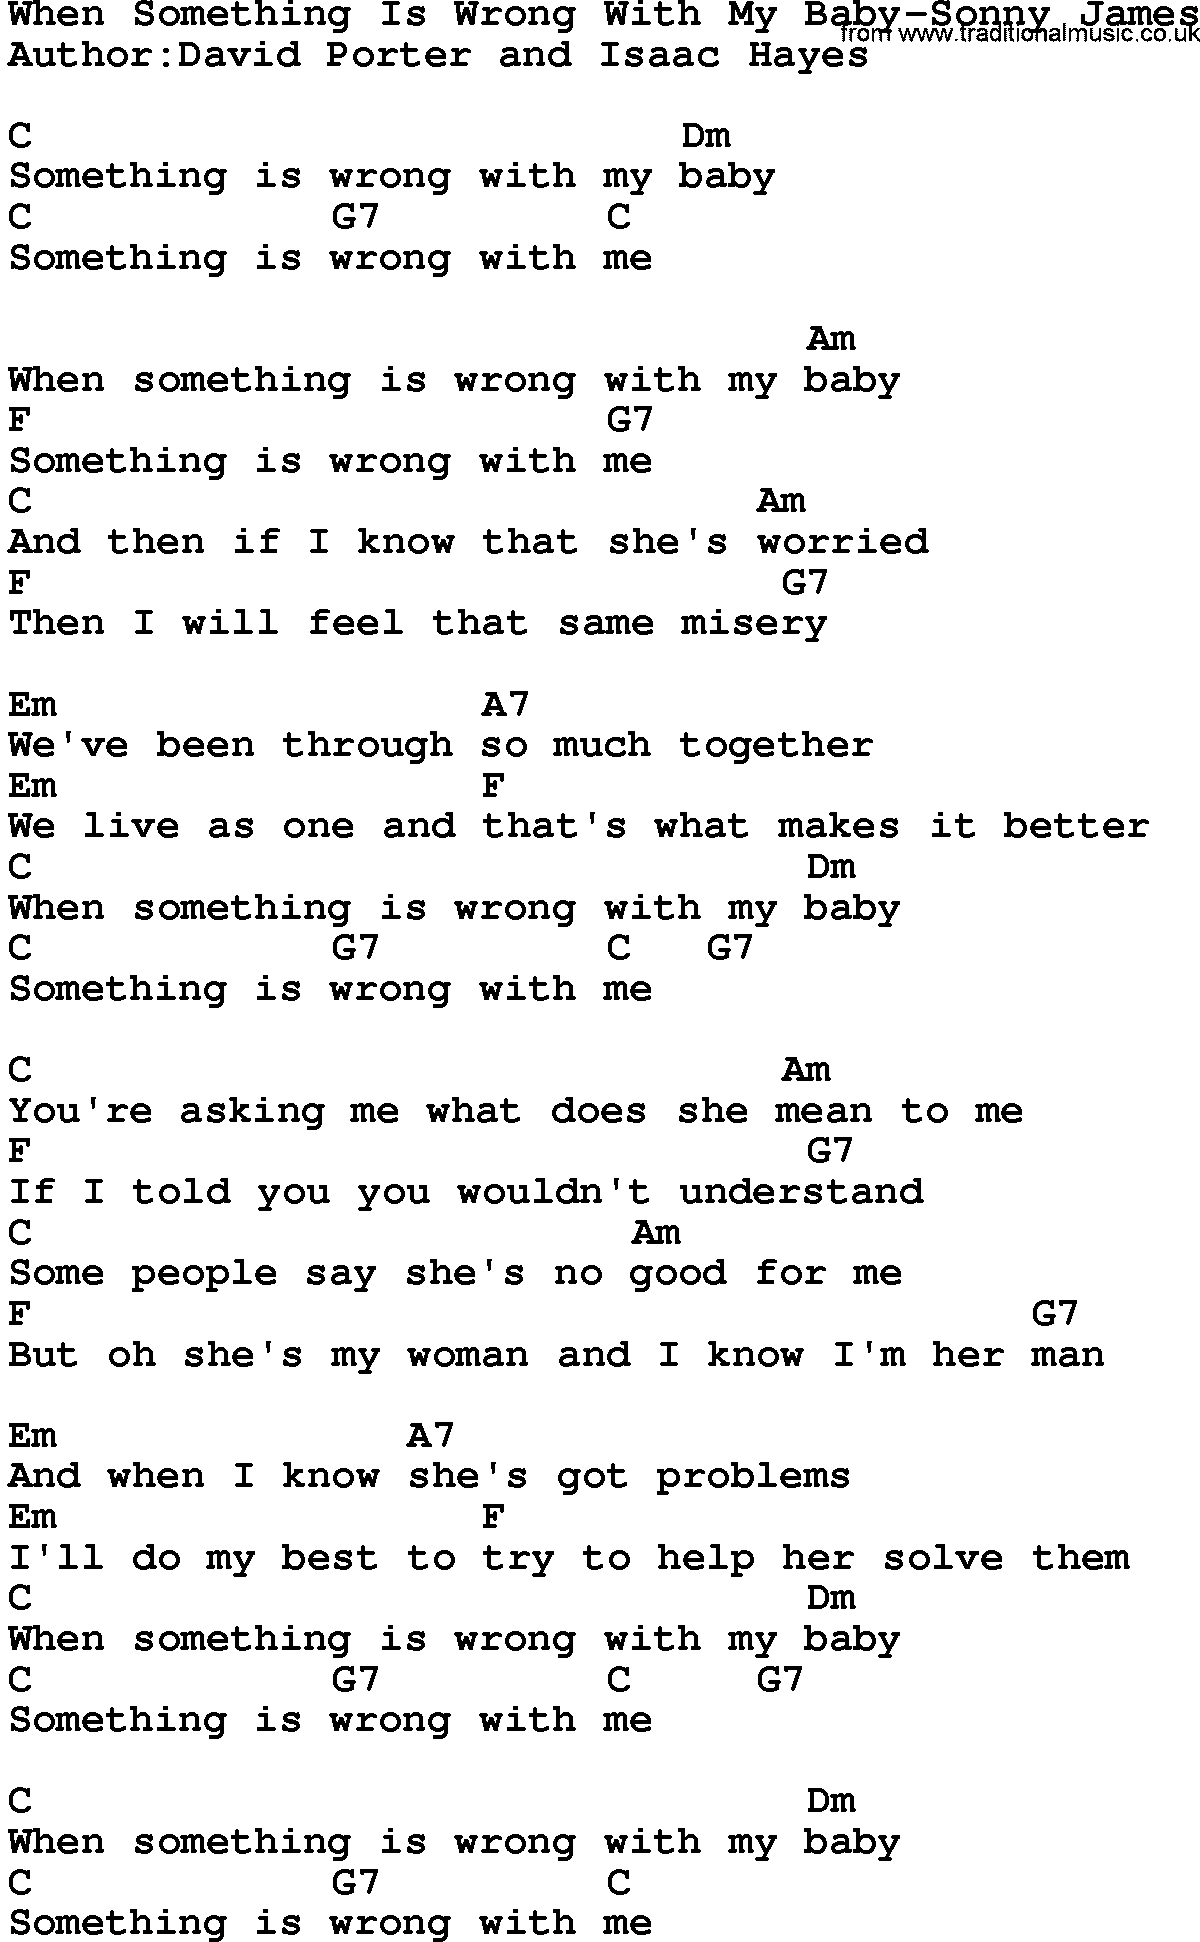 Country music song: When Something Is Wrong With My Baby-Sonny James lyrics and chords